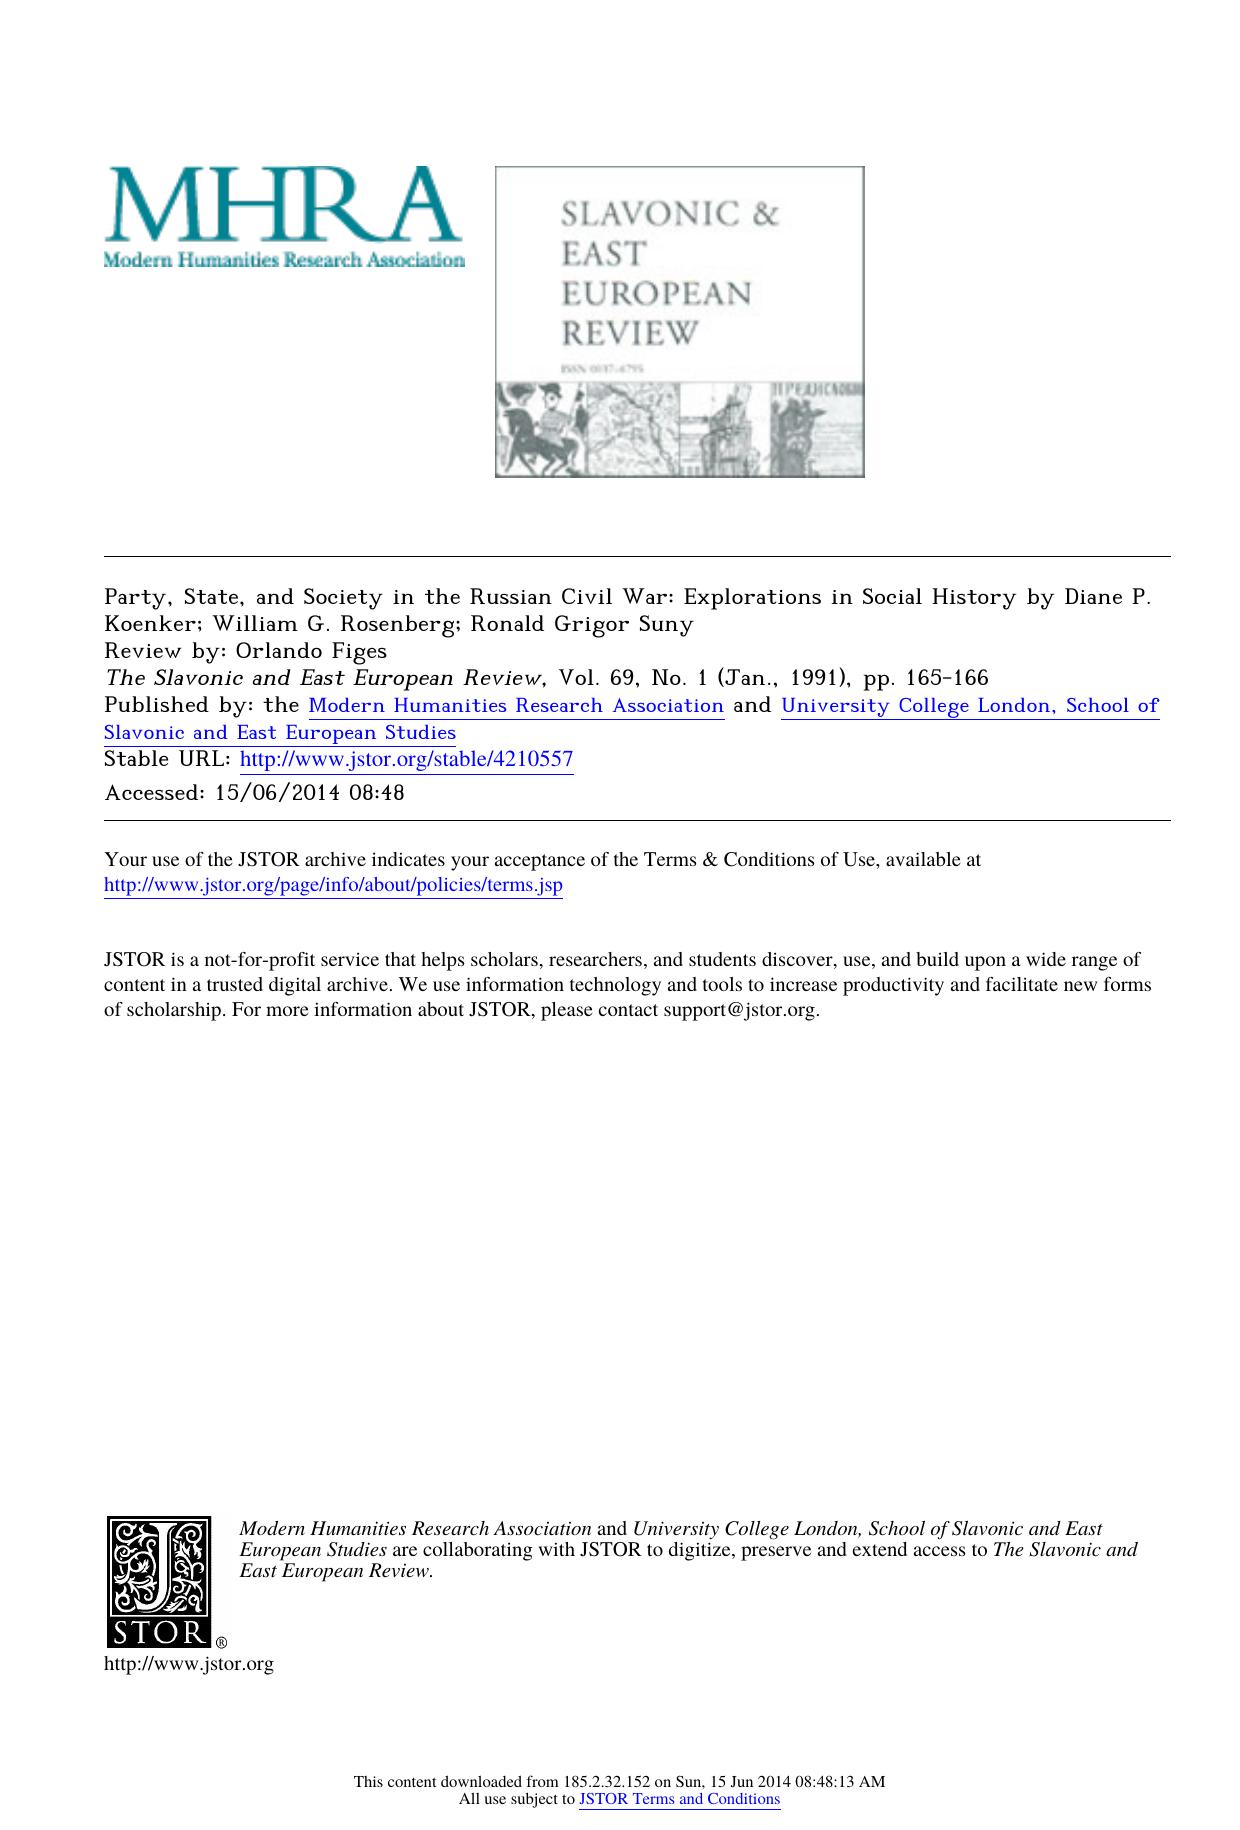 Party, State, and Society in the Russian Civil War: Explorations in Social History by Diane P. Koenker; William G. Rosenberg; Ronald Grigor Suny by Party State & Society in the Russian Civil War